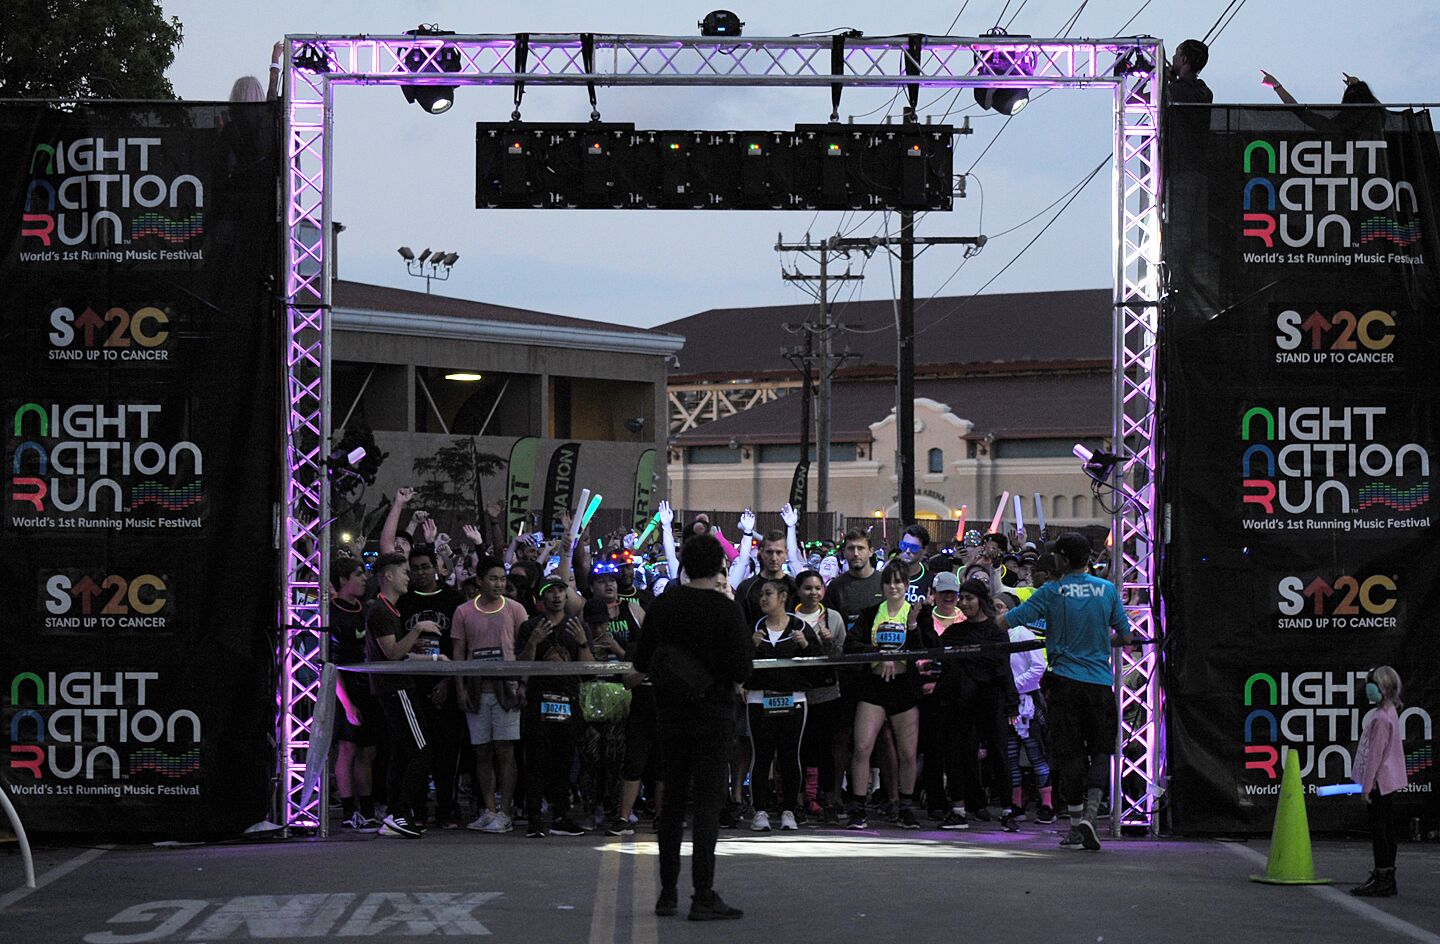 Billed as "the world's first running music festival," runners at the Night Nation Run at the Del Mar Fairgrounds experienced a music-filled course with DJs, light shows and more on Saturday, May 11, 2019.